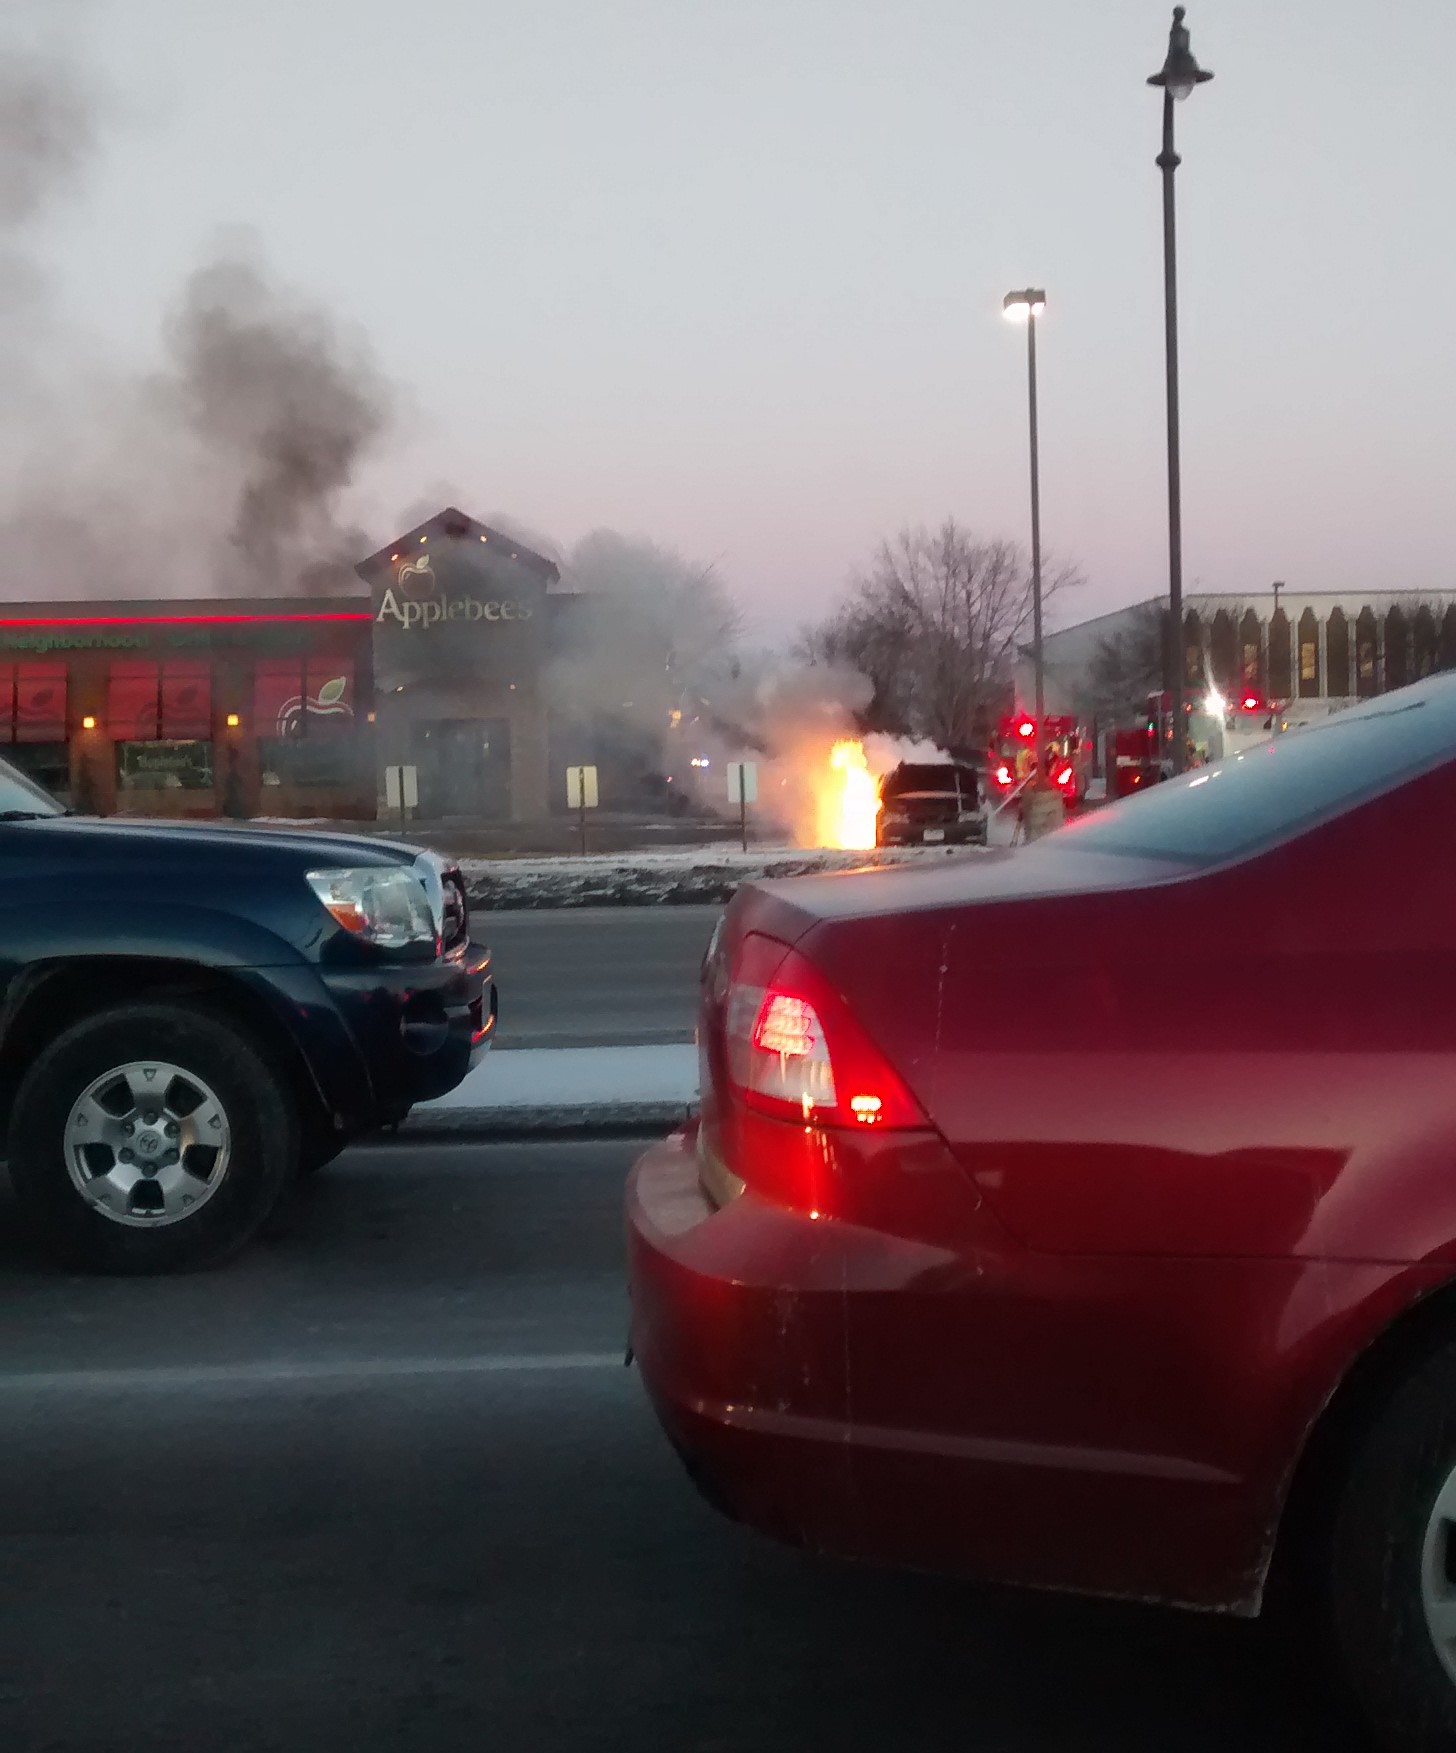 A car on fire in front of an Applebees.  Cars are patiently waiting in line to turn at a stoplight.  The scene has the feeling of the Wizard of Oz, 'Pay no attention to the man behind the curtain' 